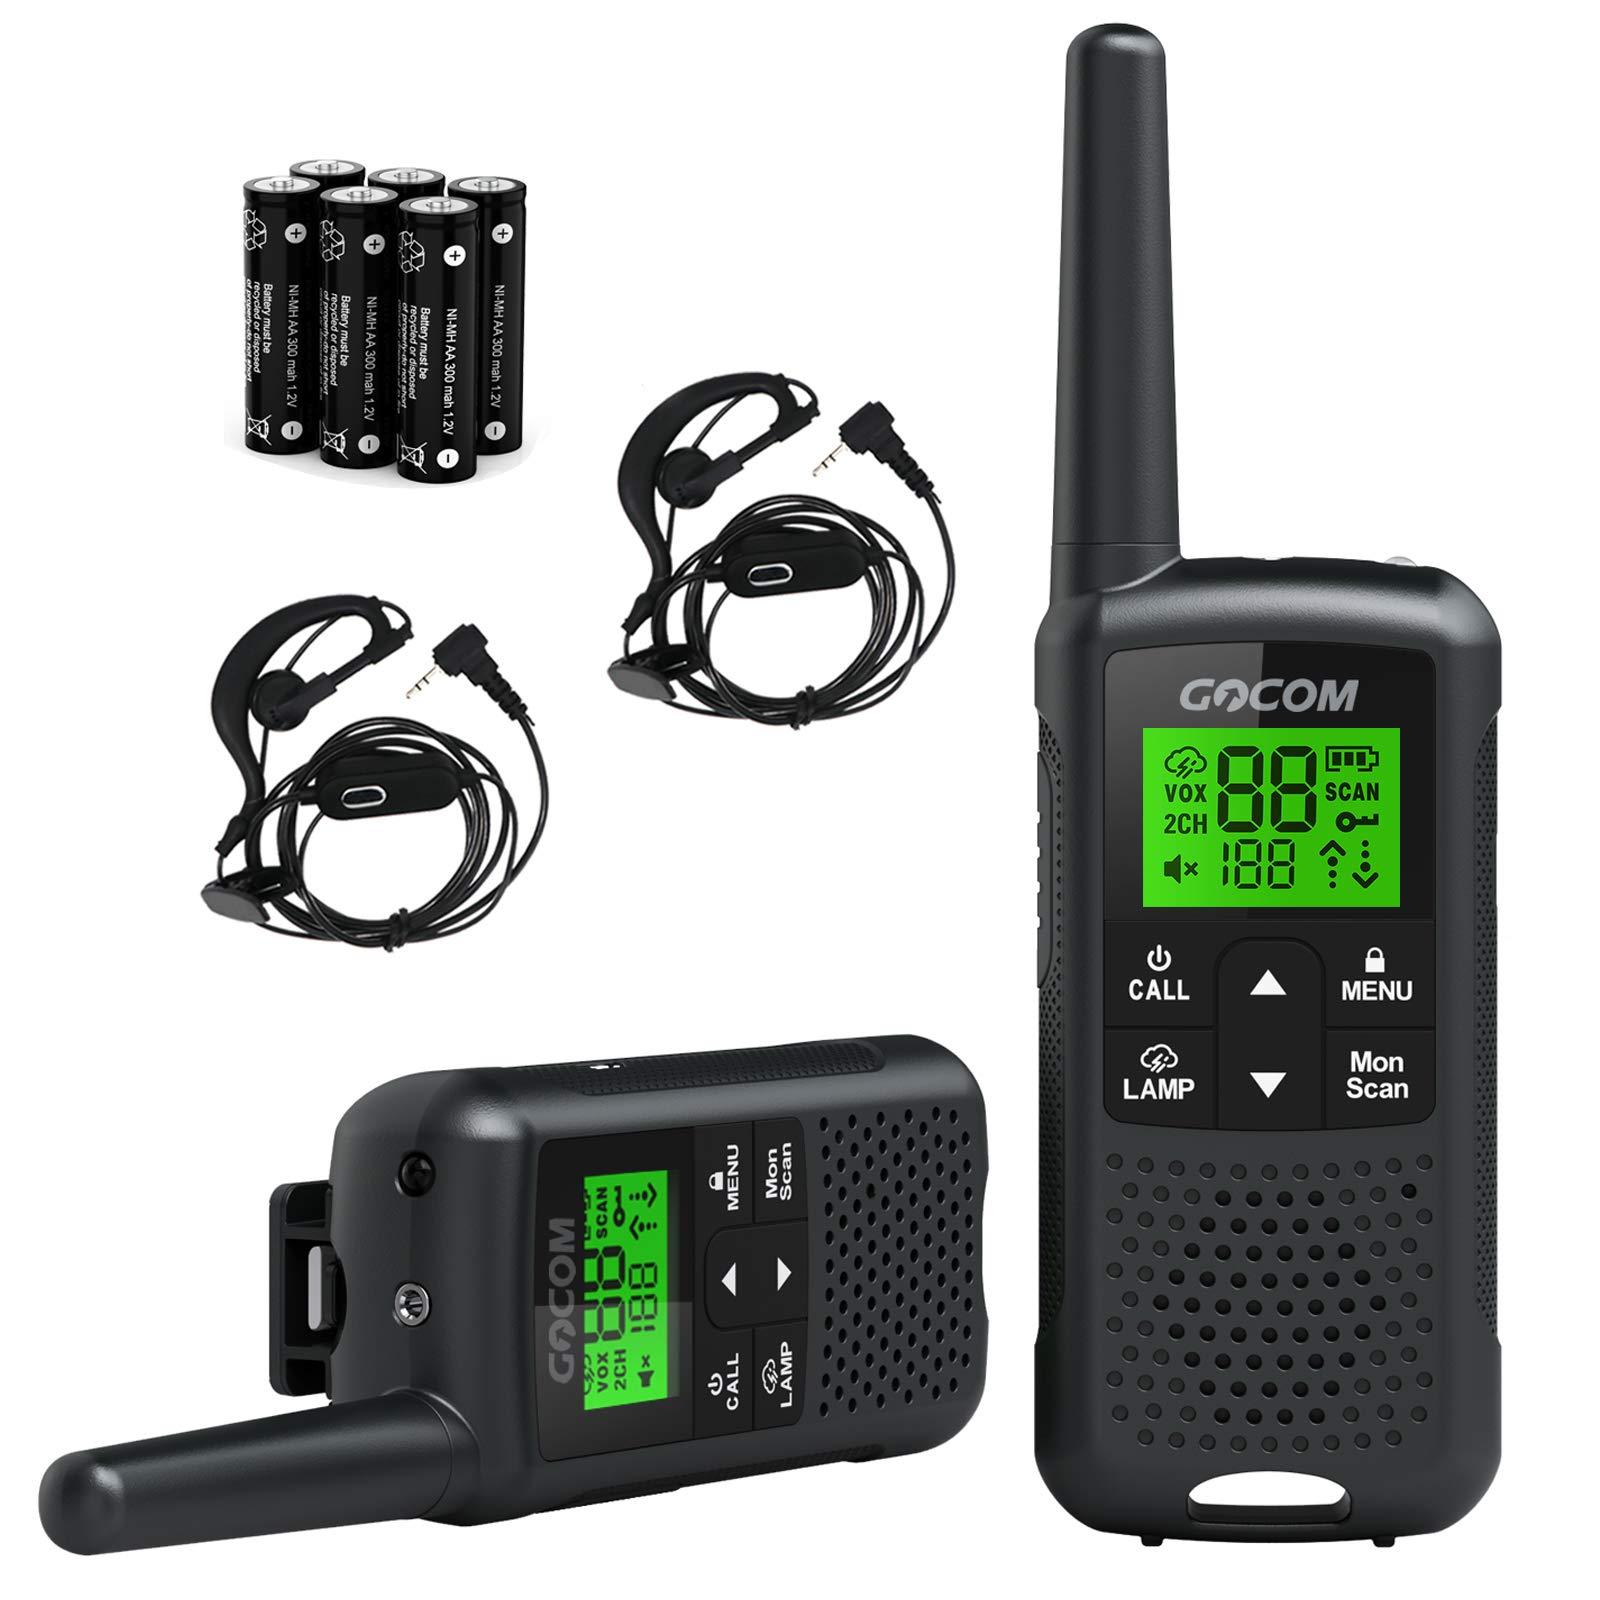 VOX　Long　Range:462.55-462.725MHz,467.5625-467.7125MHz　Range　Radios　Rechargeable　G200　Talkies　for　CH　NOAA　Radio　Family　Scan　UHF　BeesActive　Service　22　(FRS)　Adults,　Walkie　Frequency　Two　Flashlight　Way　GOCOM　Australia